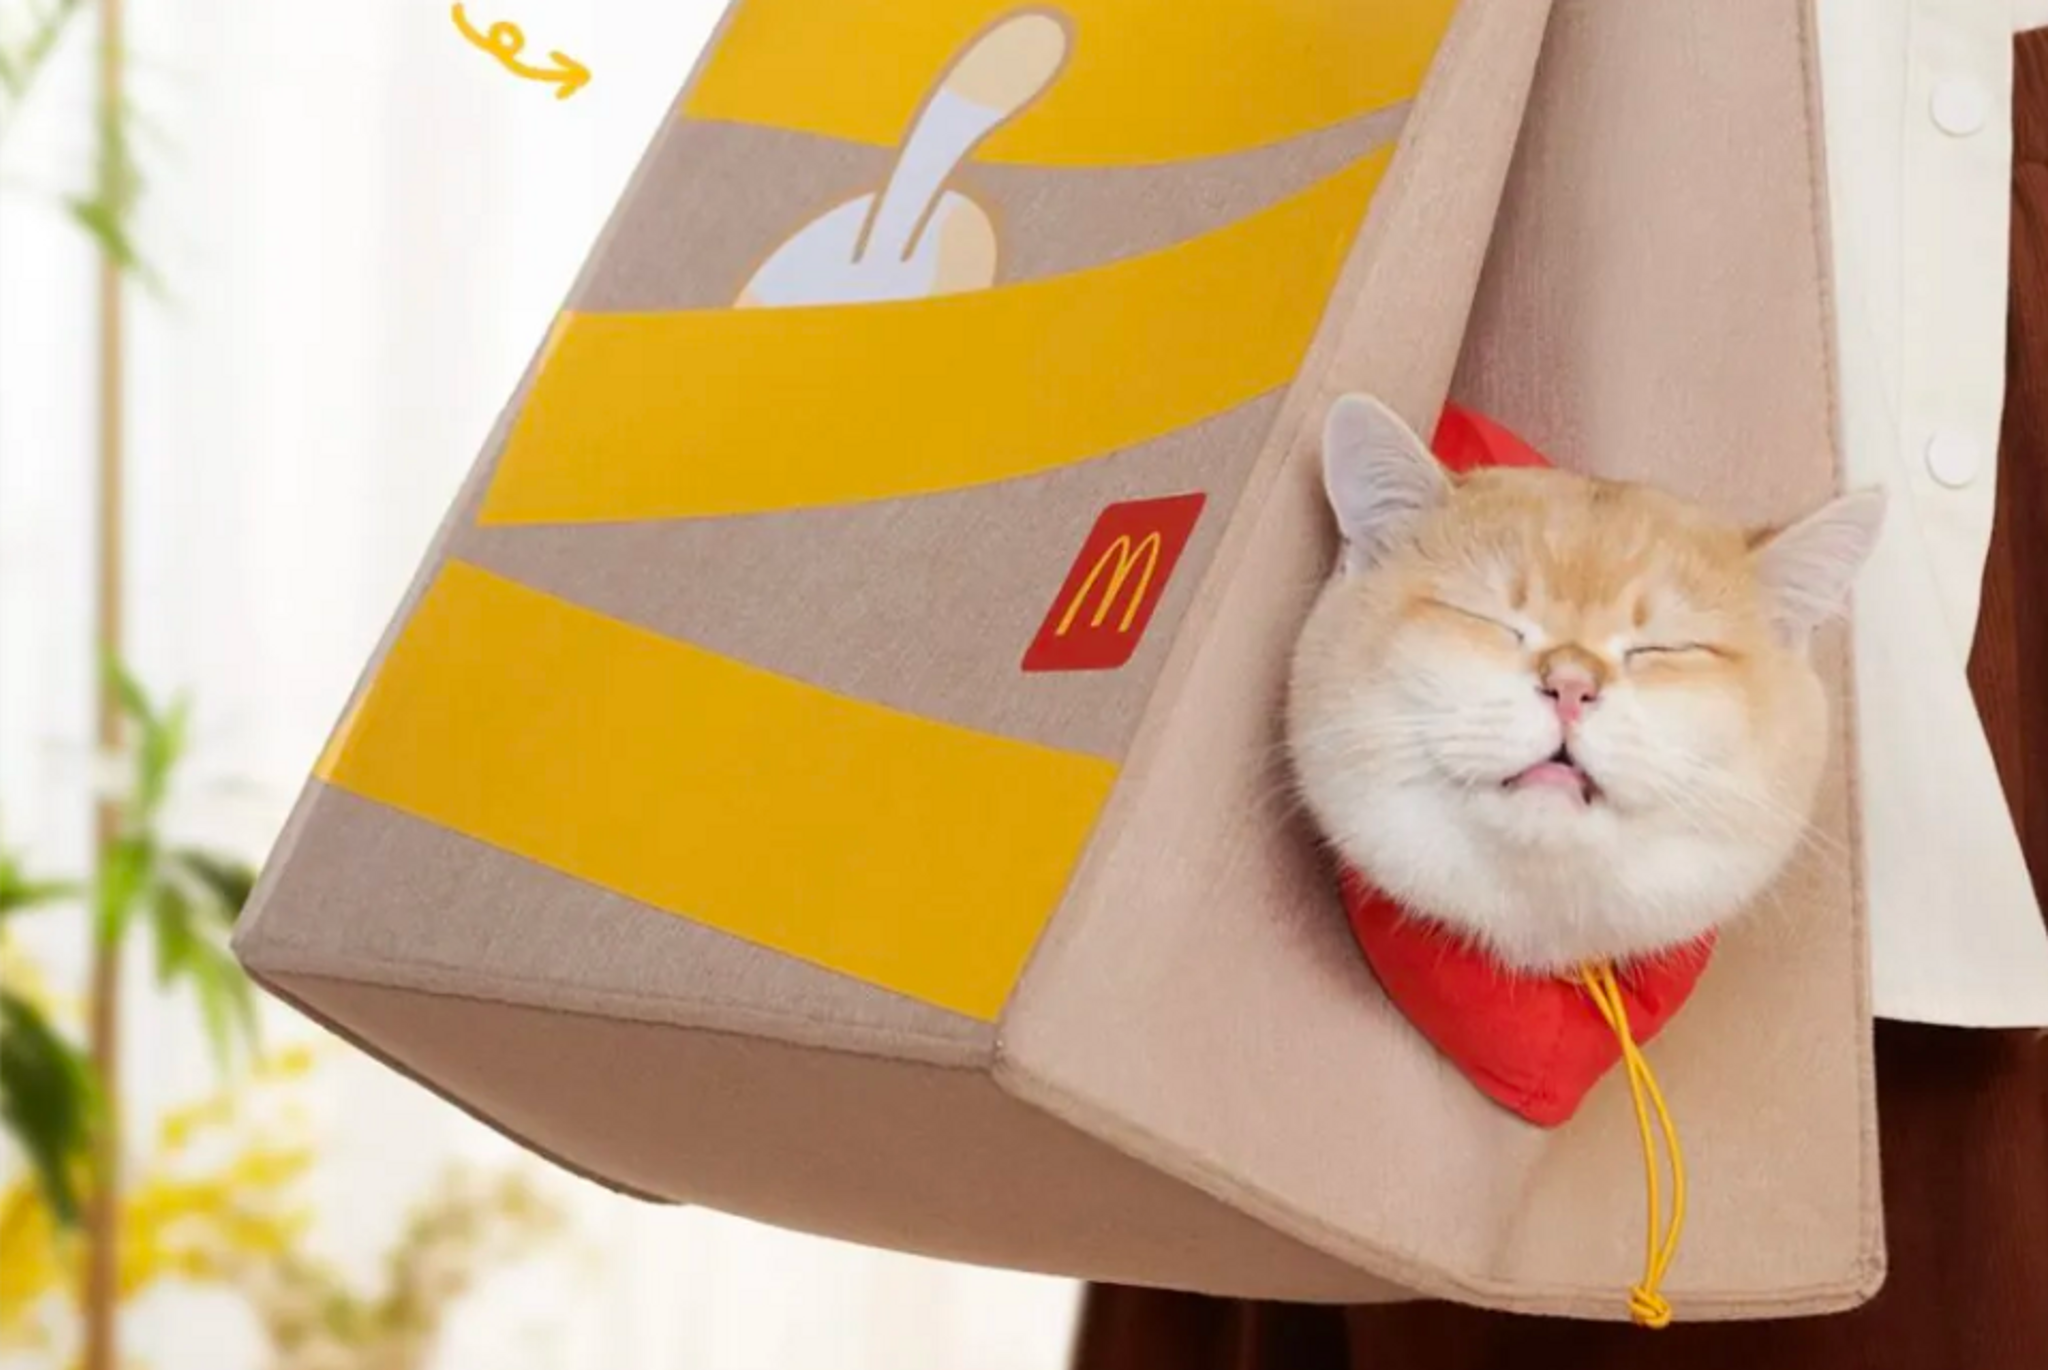 McDonald's adapts delivery bags into portable cat beds